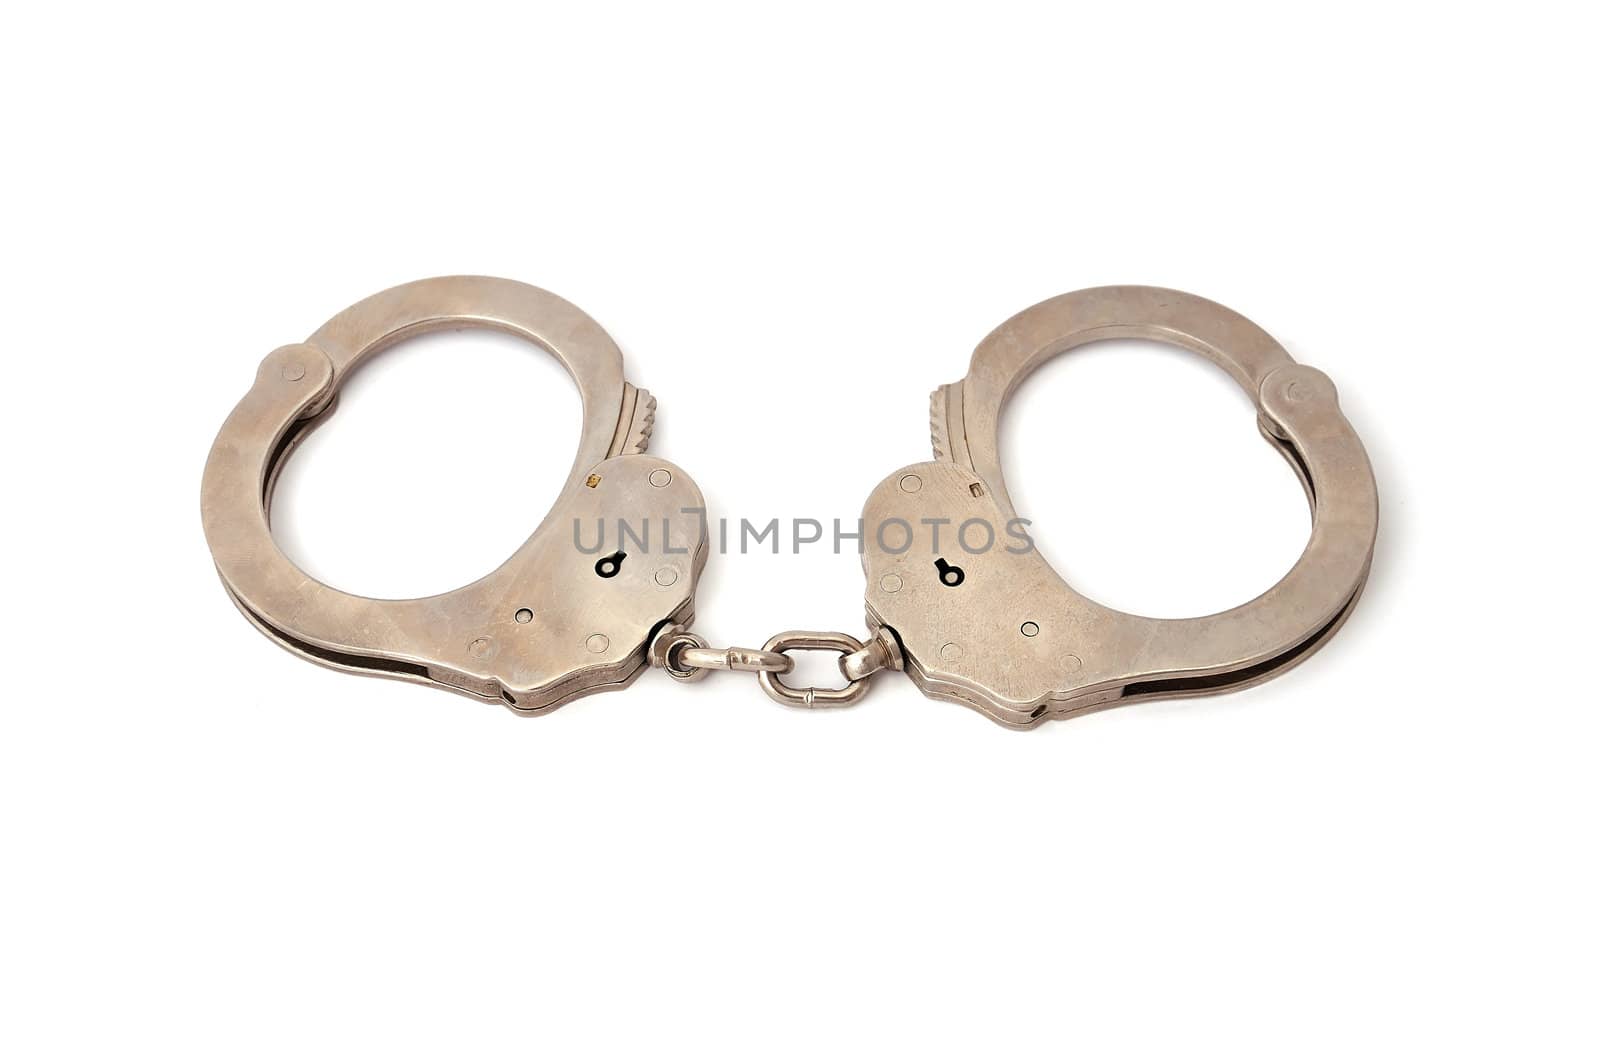 Handcuffs on a white background